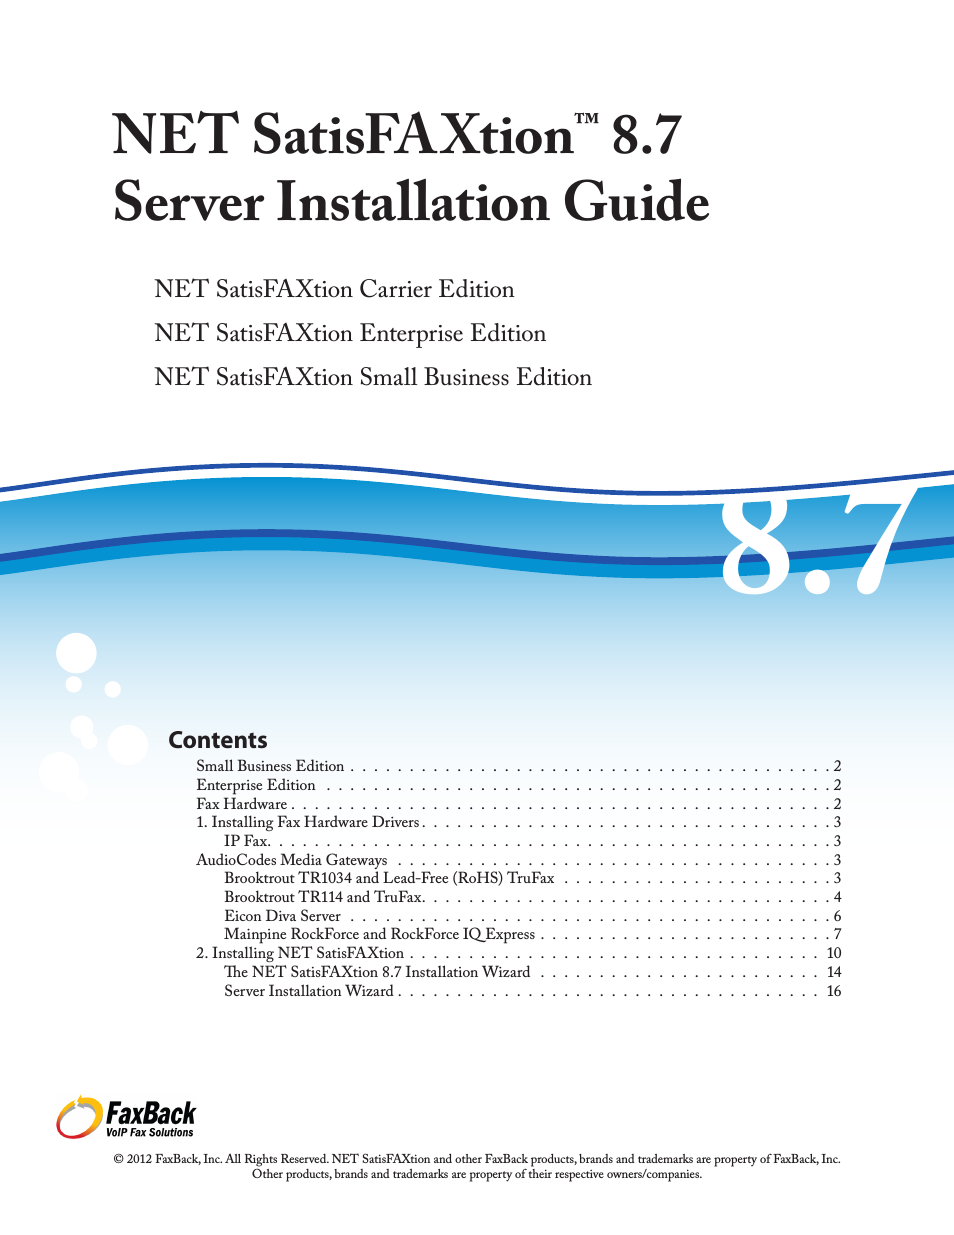 NET SatisFAXtion 8.7 (Including R3) - Installation Guide